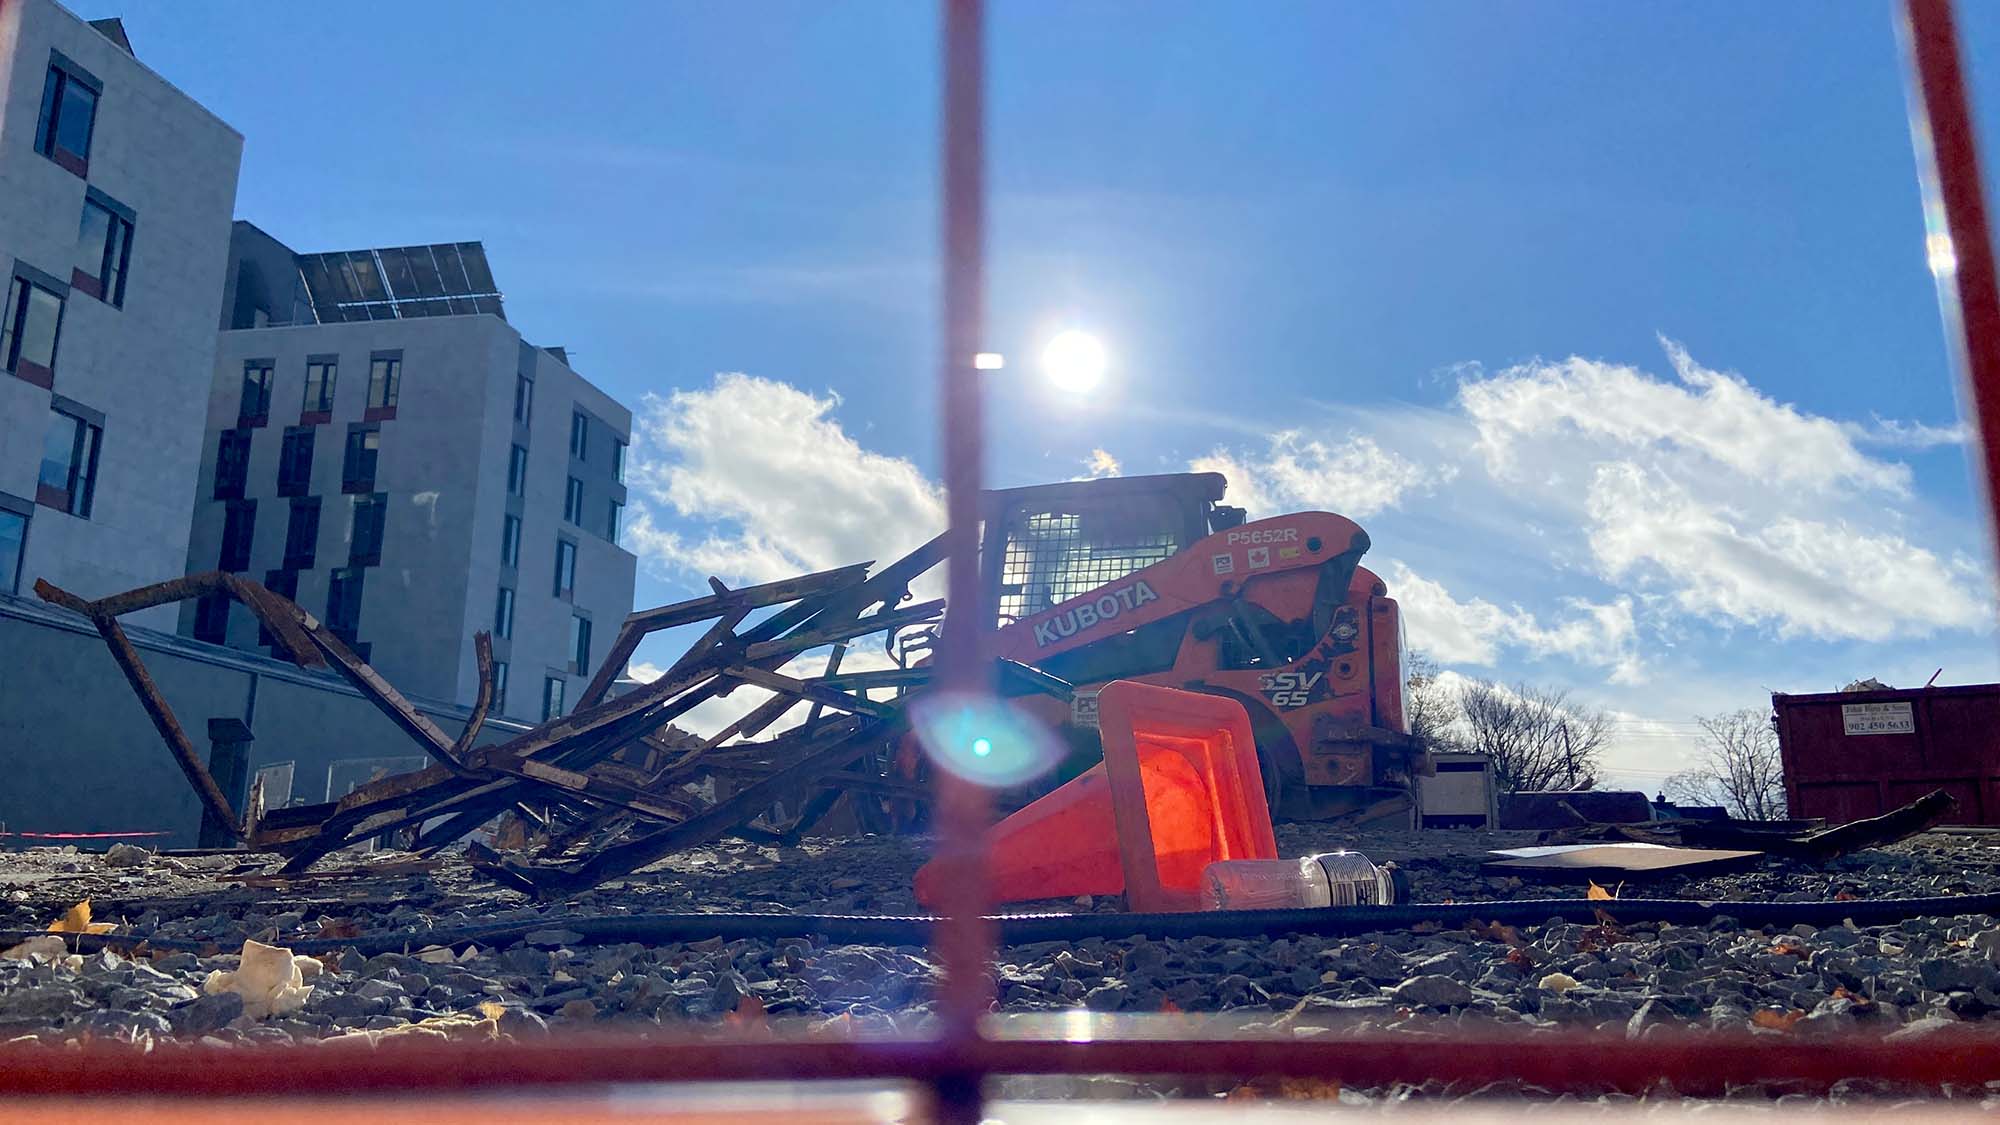 Although workers have started preparing the site of Dalhousie's new event centre, the university announced on Wednesday that construction will be paused.